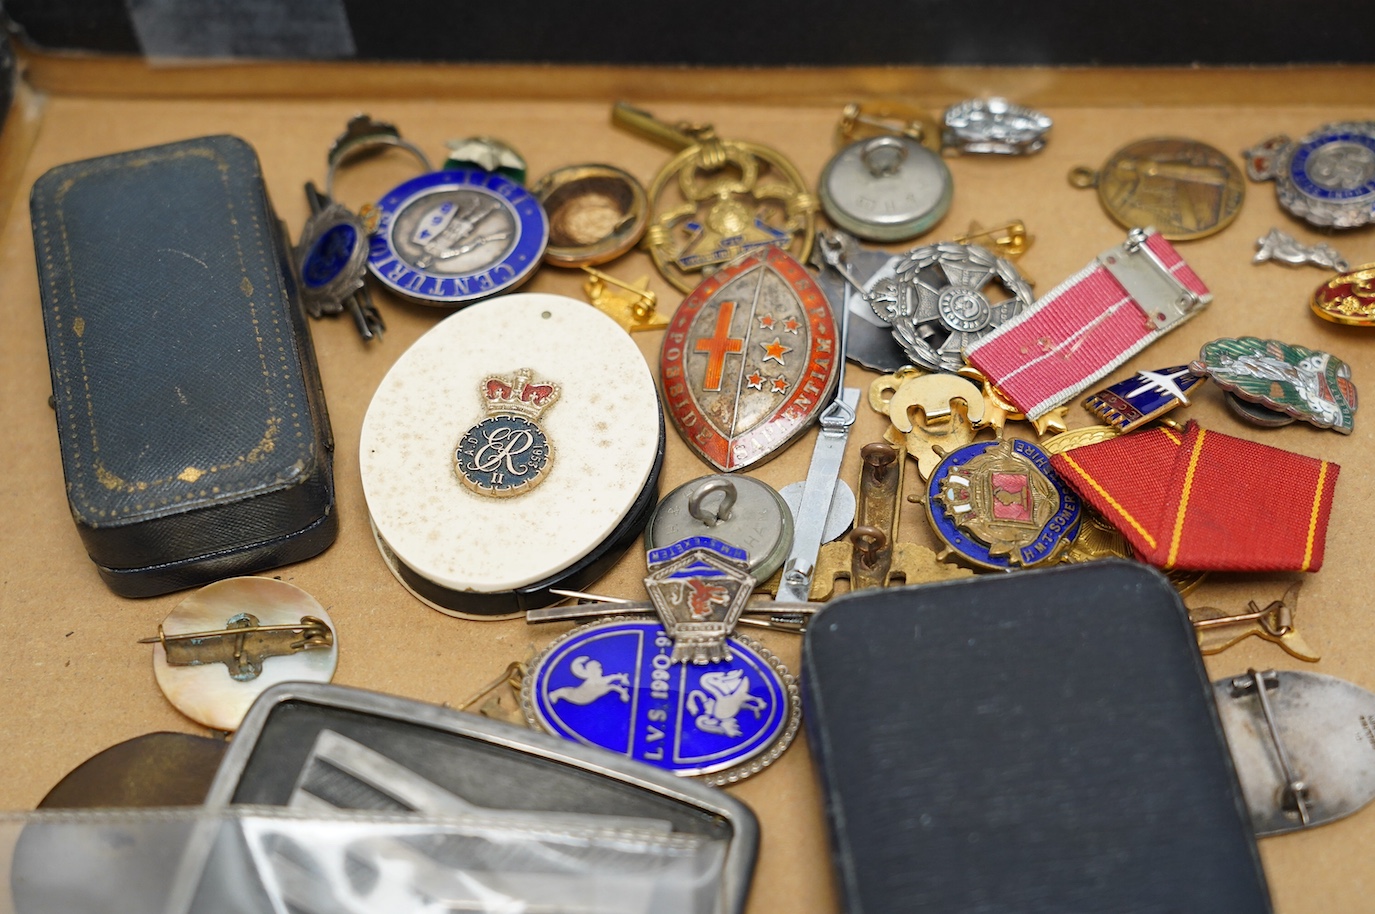 A collection of WWII sweetheart badges, silver badges, military buttons, RAF ephemera, a miniature OBE award, etc. Condition - fair to good